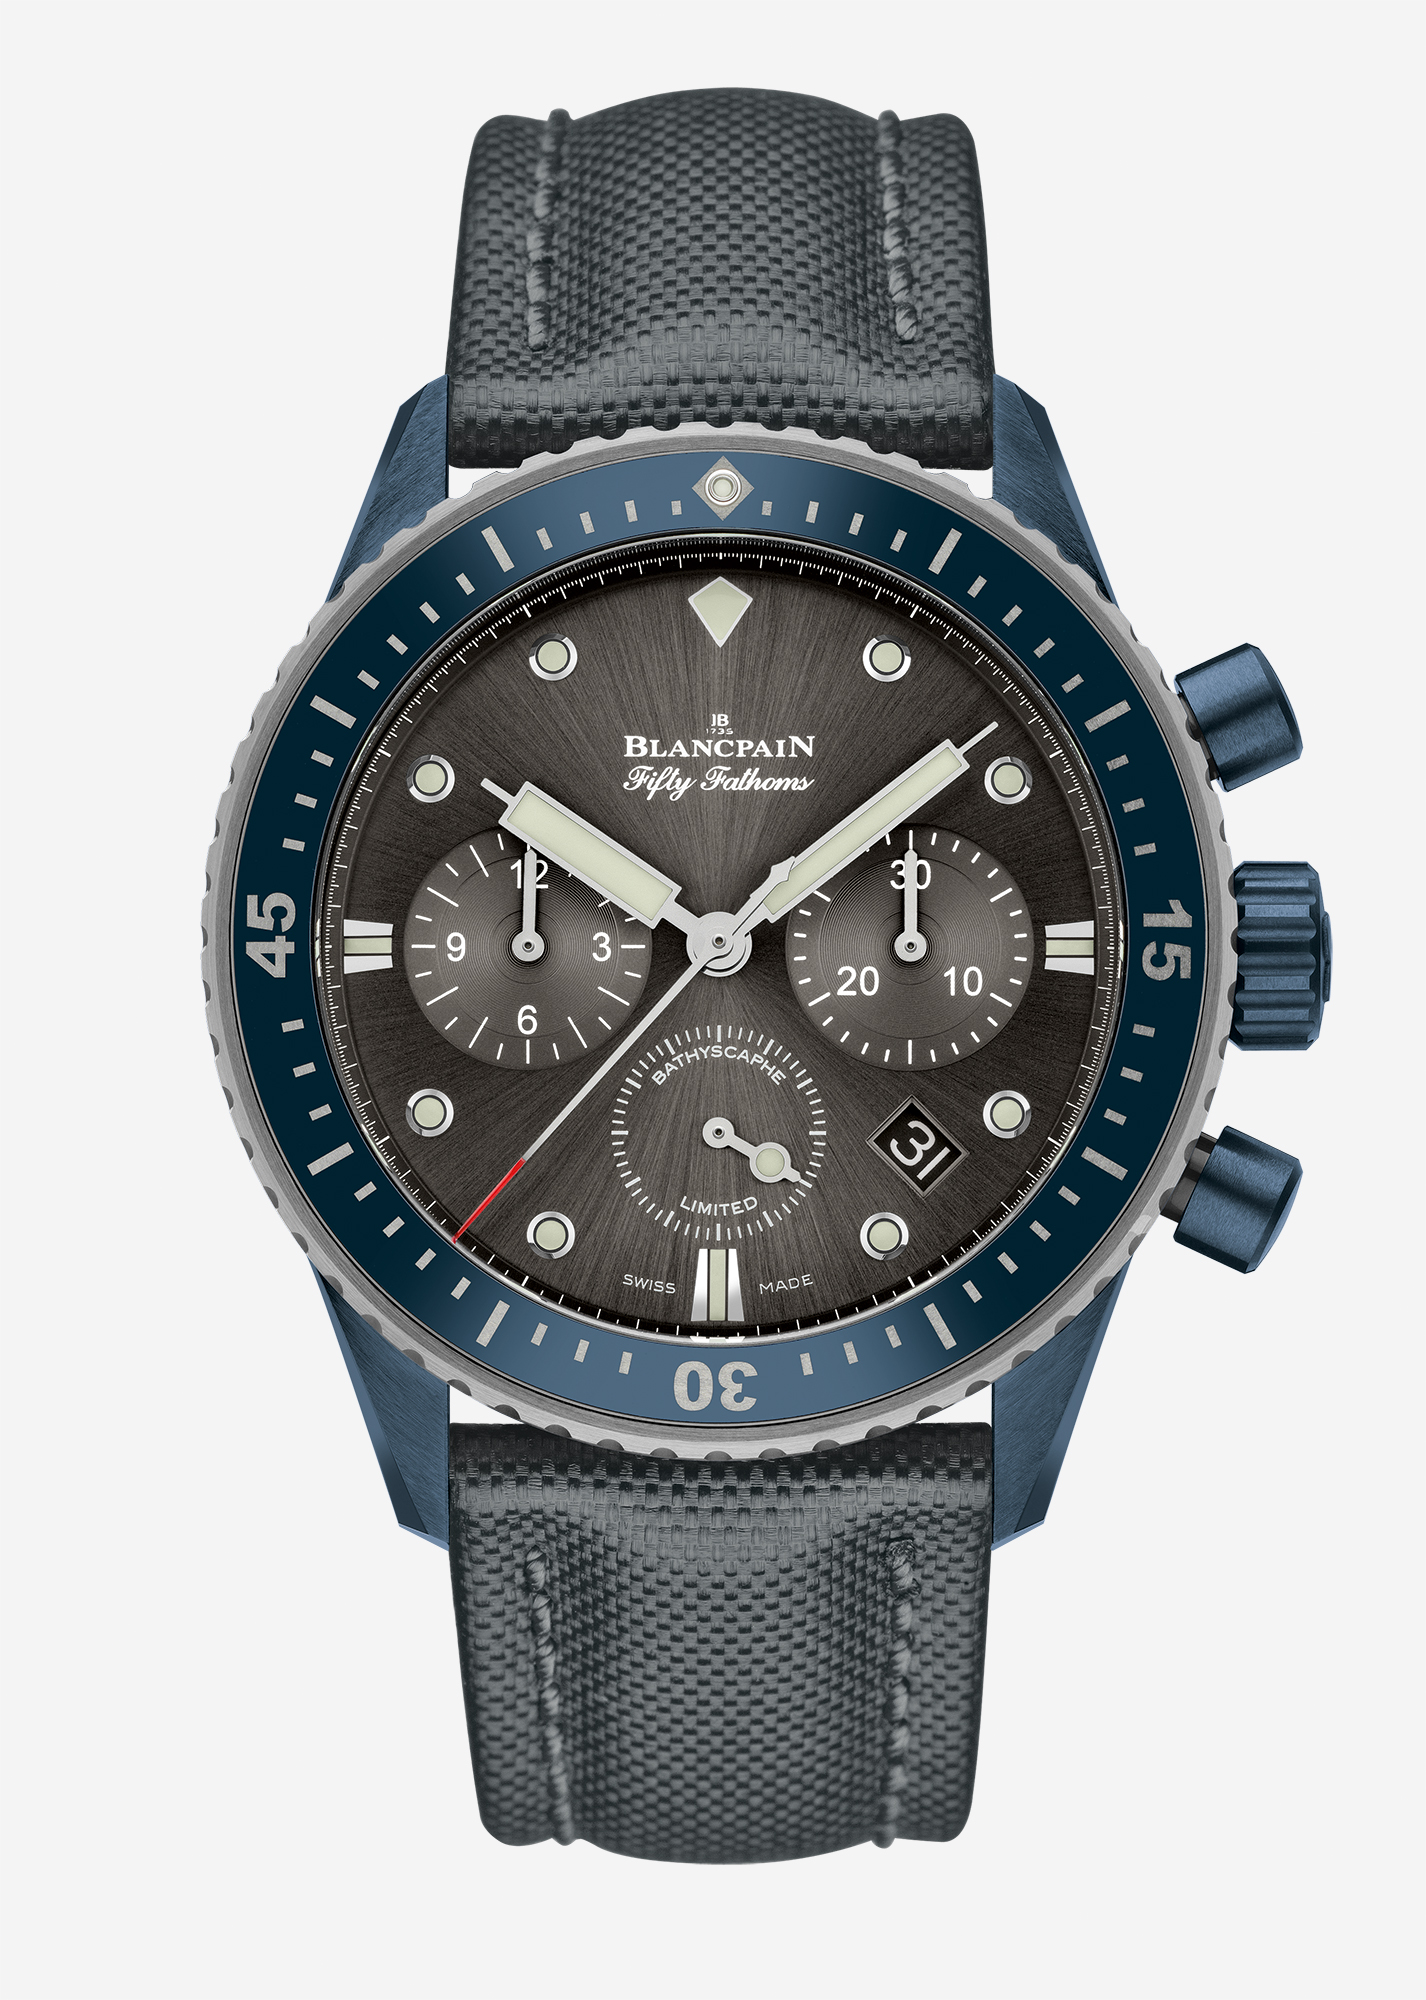 Sales of this Blancpain timepiece aid ocean conservation